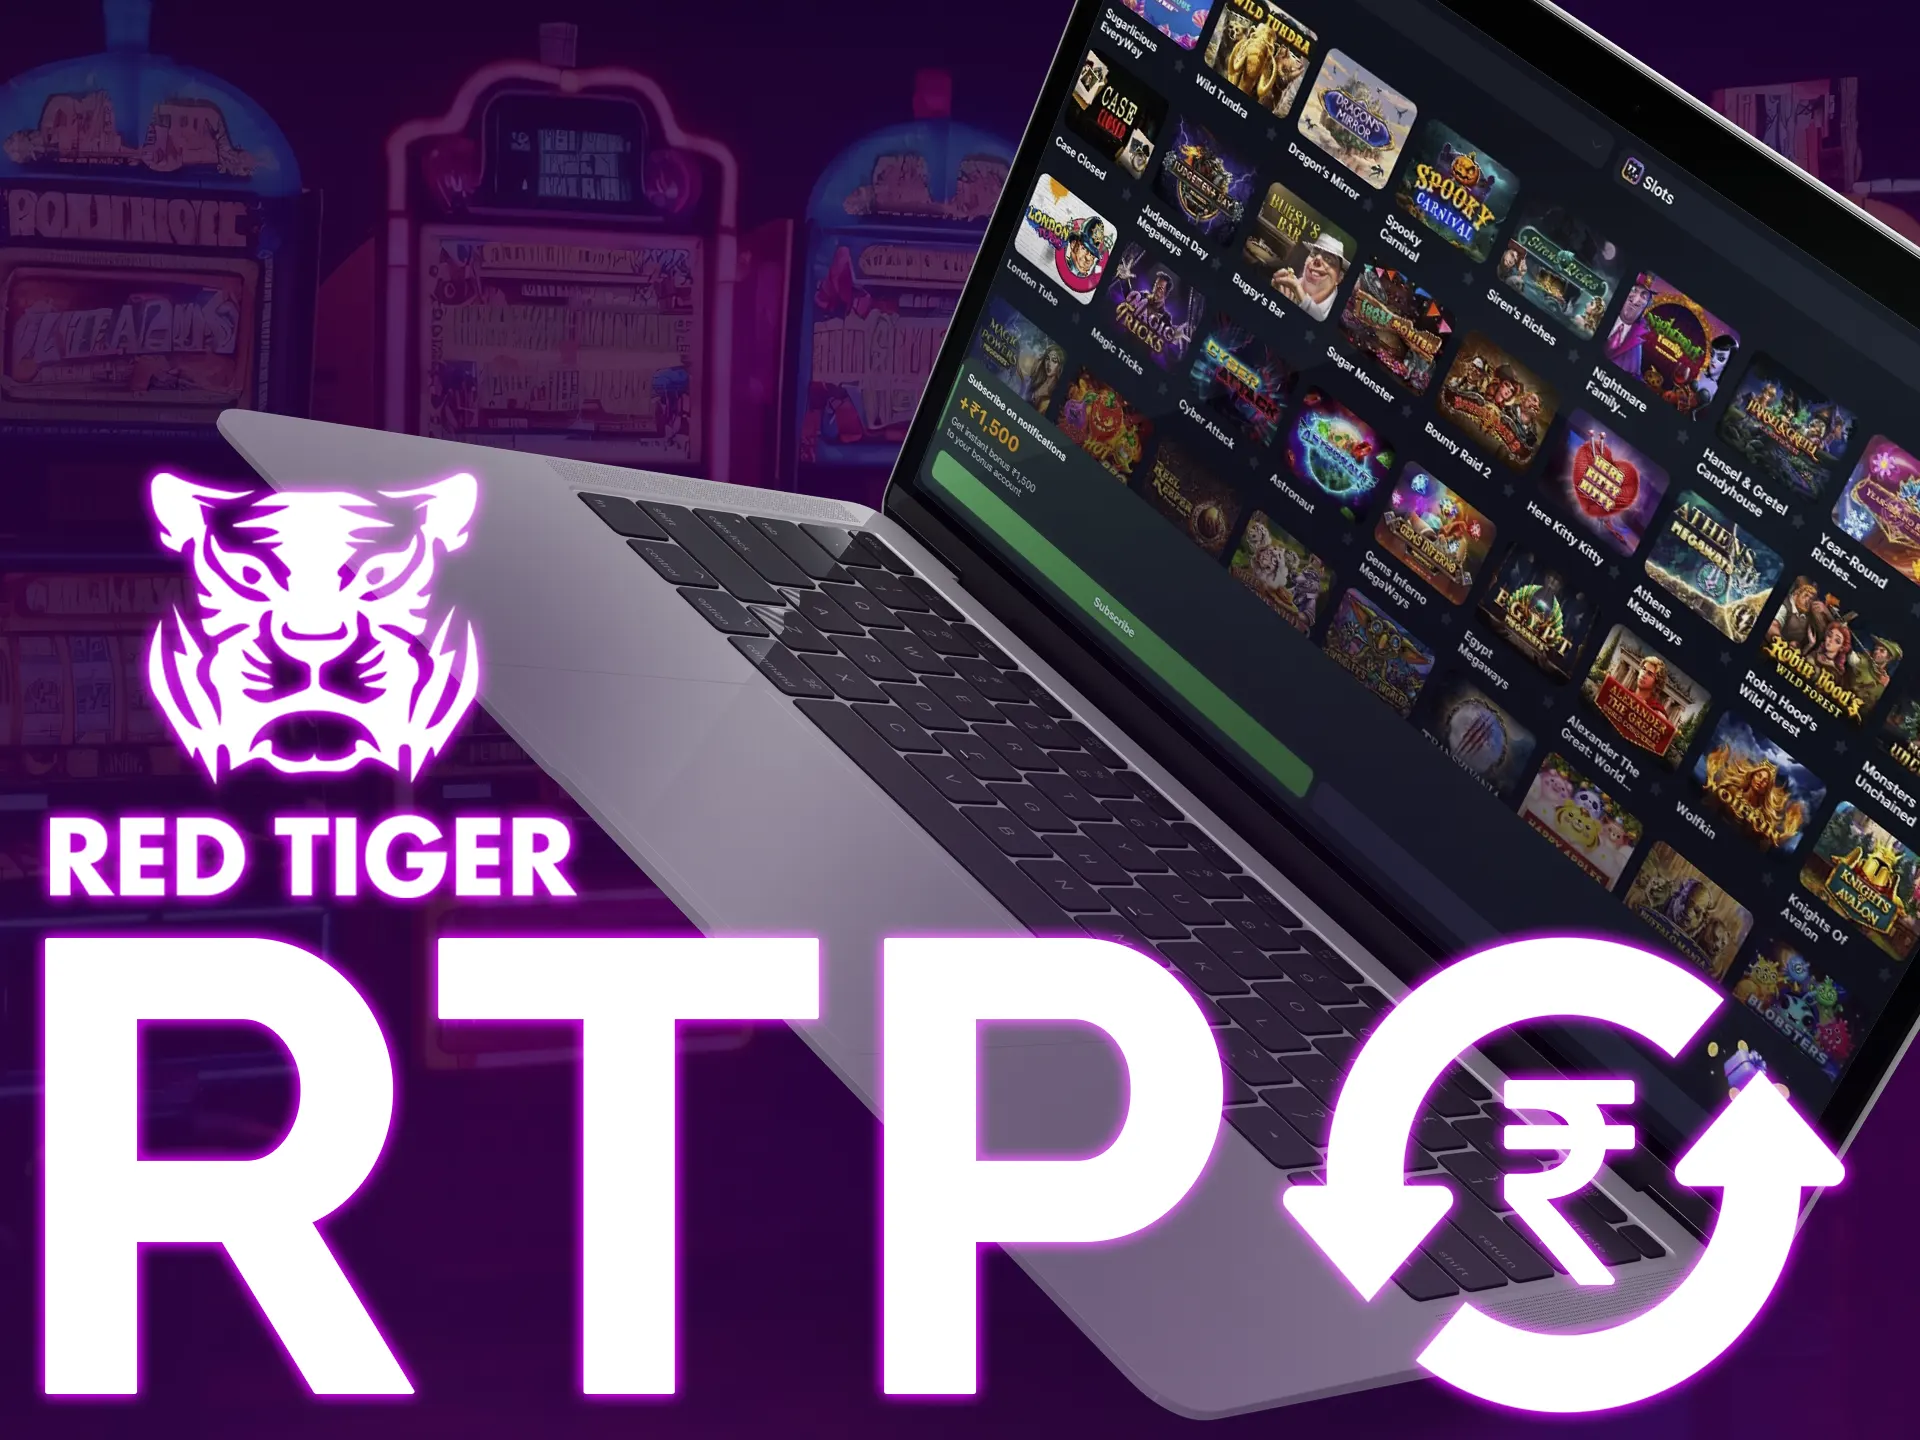 Red Tiger slots generally have a high RTP, with averages around 96%.